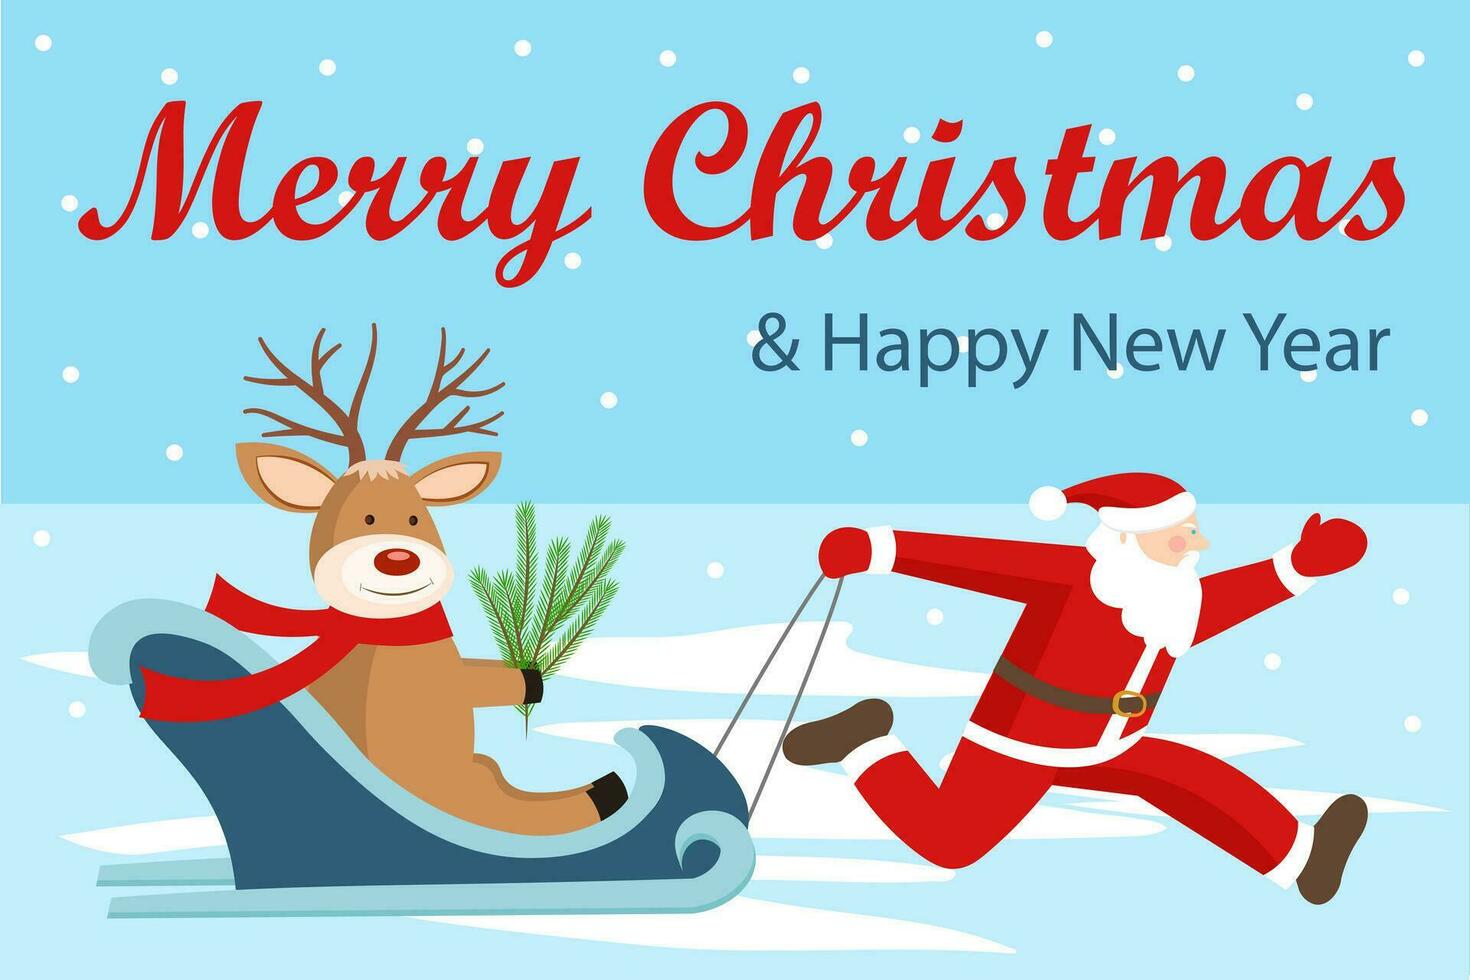 Santa Claus takes a reindeer on a sleigh. Snowy weather. Merry Christmas and Happy New Year. vector